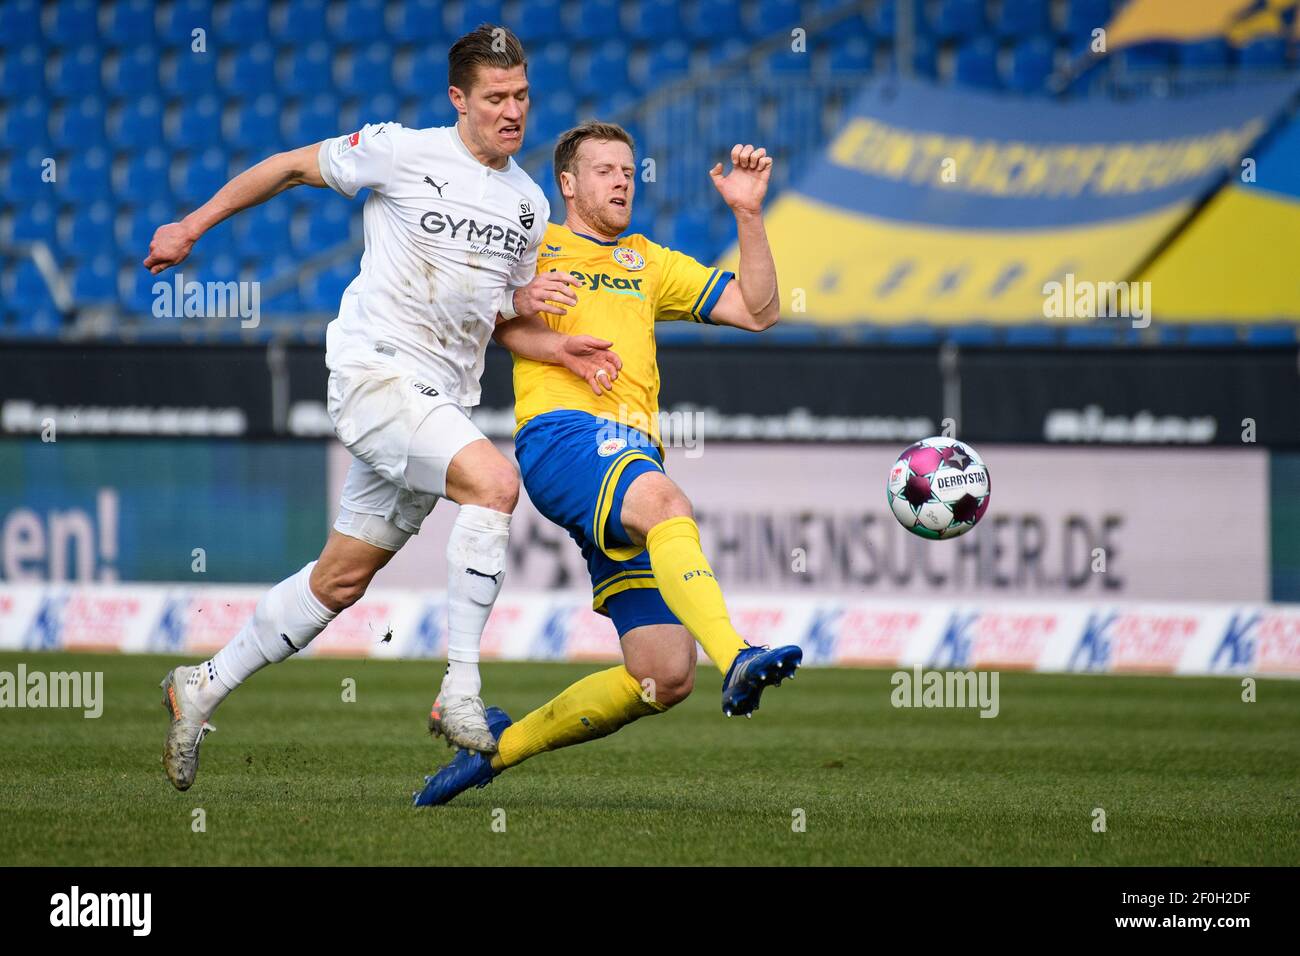 Brunswick, Germany. 07th Mar, 2021. Football: 2. Bundesliga, Eintracht Braunschweig - SV Sandhausen, Matchday 24 at Eintracht-Stadion. Sandhausen's striker Kevin Behrens (l) plays against Braunschweig's defender Brian Behrendt. Credit: Swen Pförtner/dpa - IMPORTANT NOTE: In accordance with the regulations of the DFL Deutsche Fußball Liga and/or the DFB Deutscher Fußball-Bund, it is prohibited to use or have used photographs taken in the stadium and/or of the match in the form of sequence pictures and/or video-like photo series./dpa/Alamy Live News Stock Photo